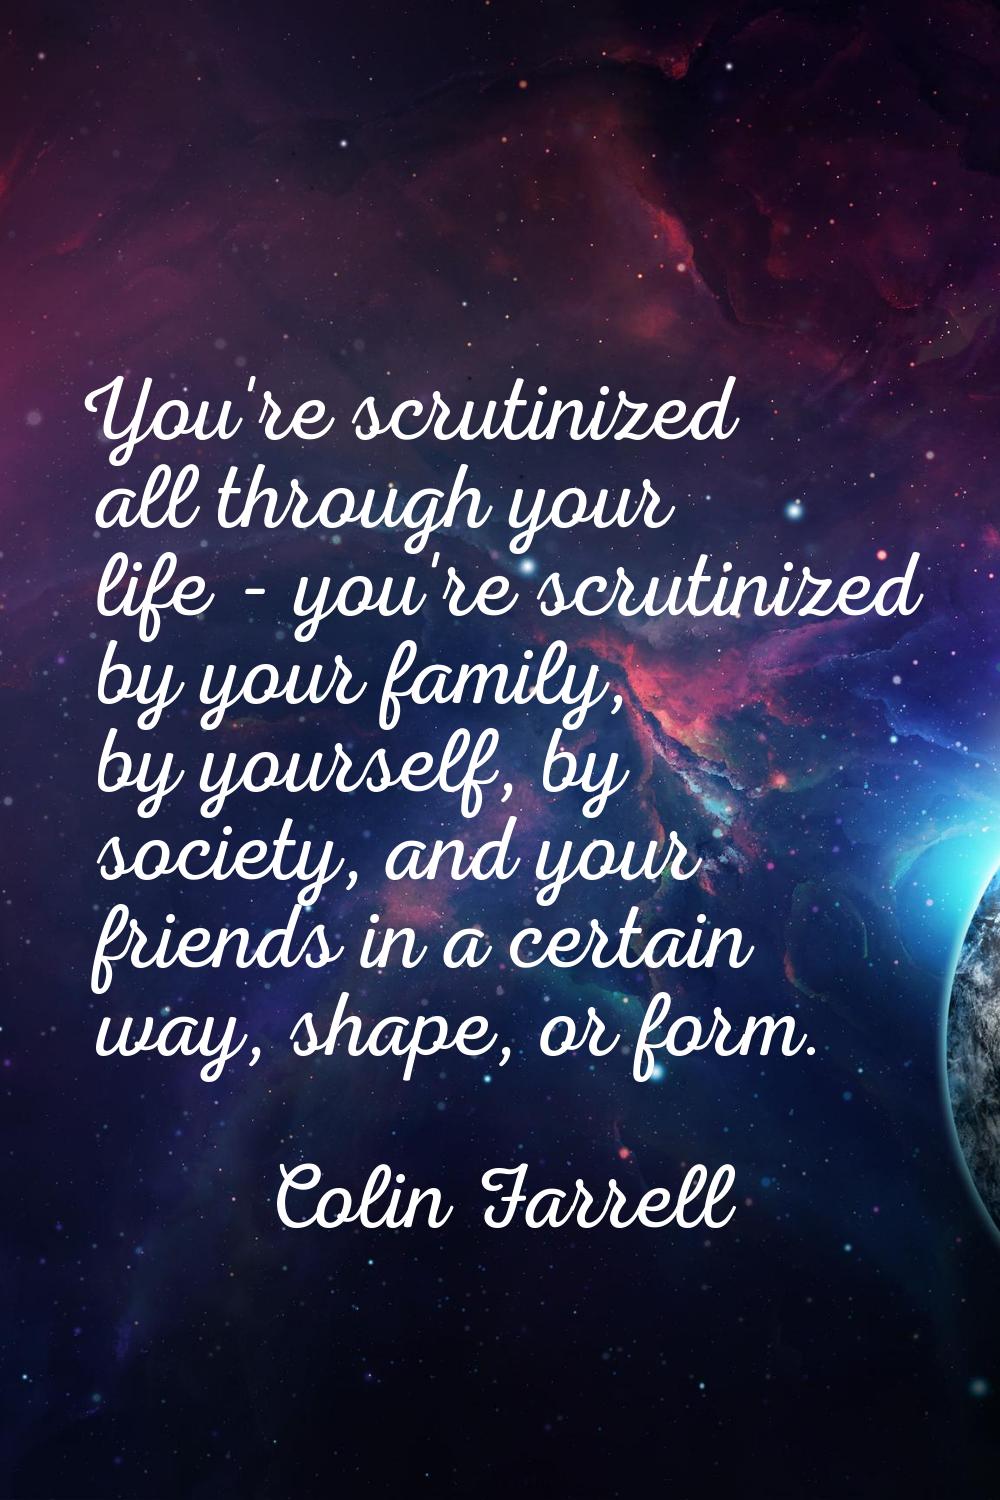 You're scrutinized all through your life - you're scrutinized by your family, by yourself, by socie